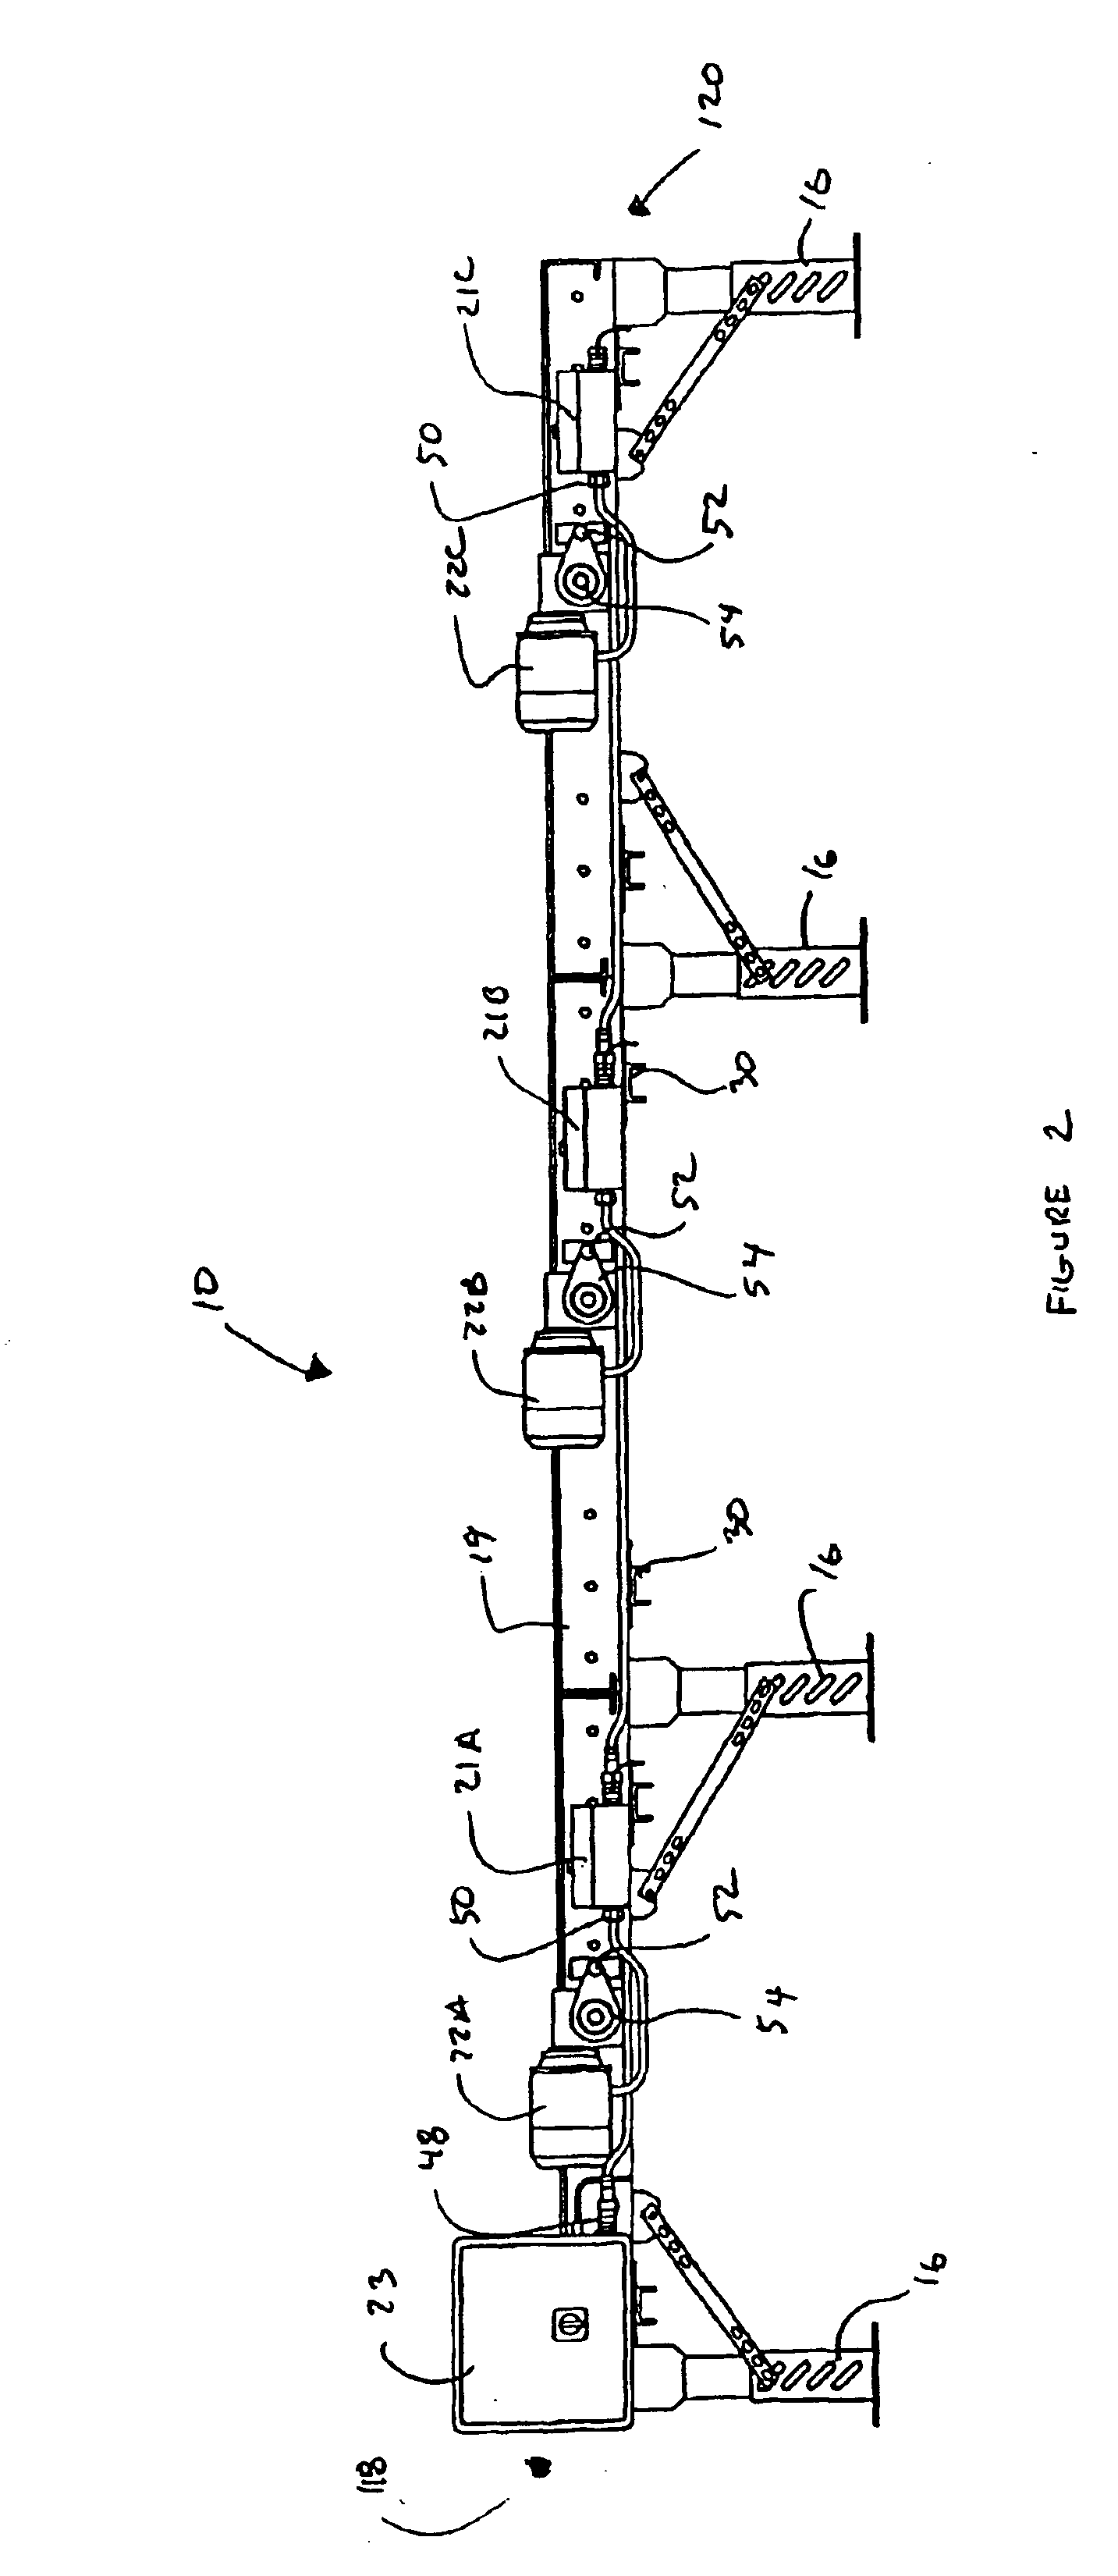 Decentralized drive system for a conveyor